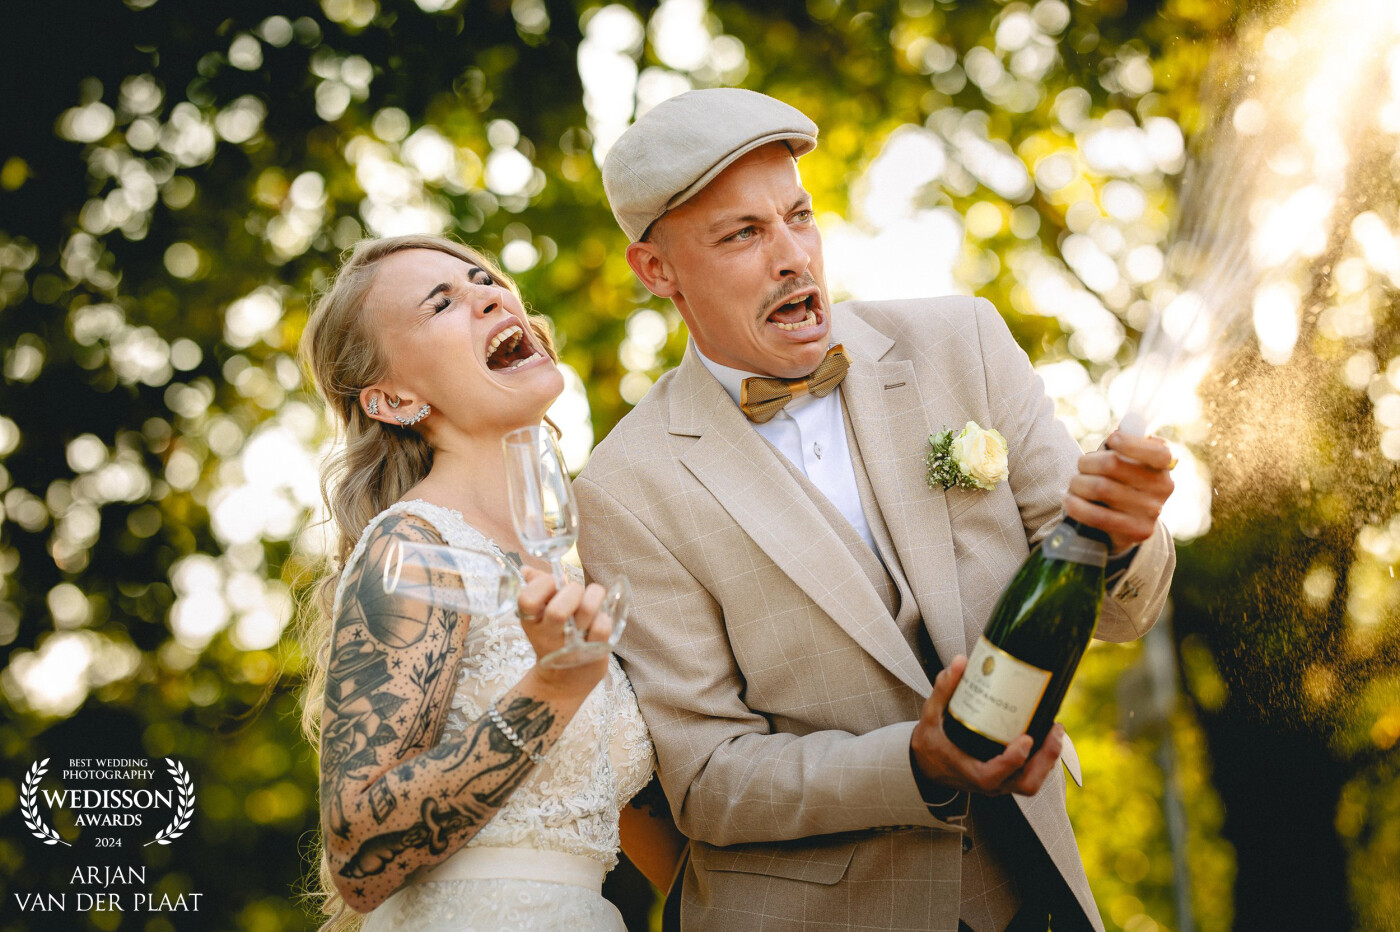 One of my favorite weddings. The enthusiasm with which this couple experienced their day is unknown. Love it!